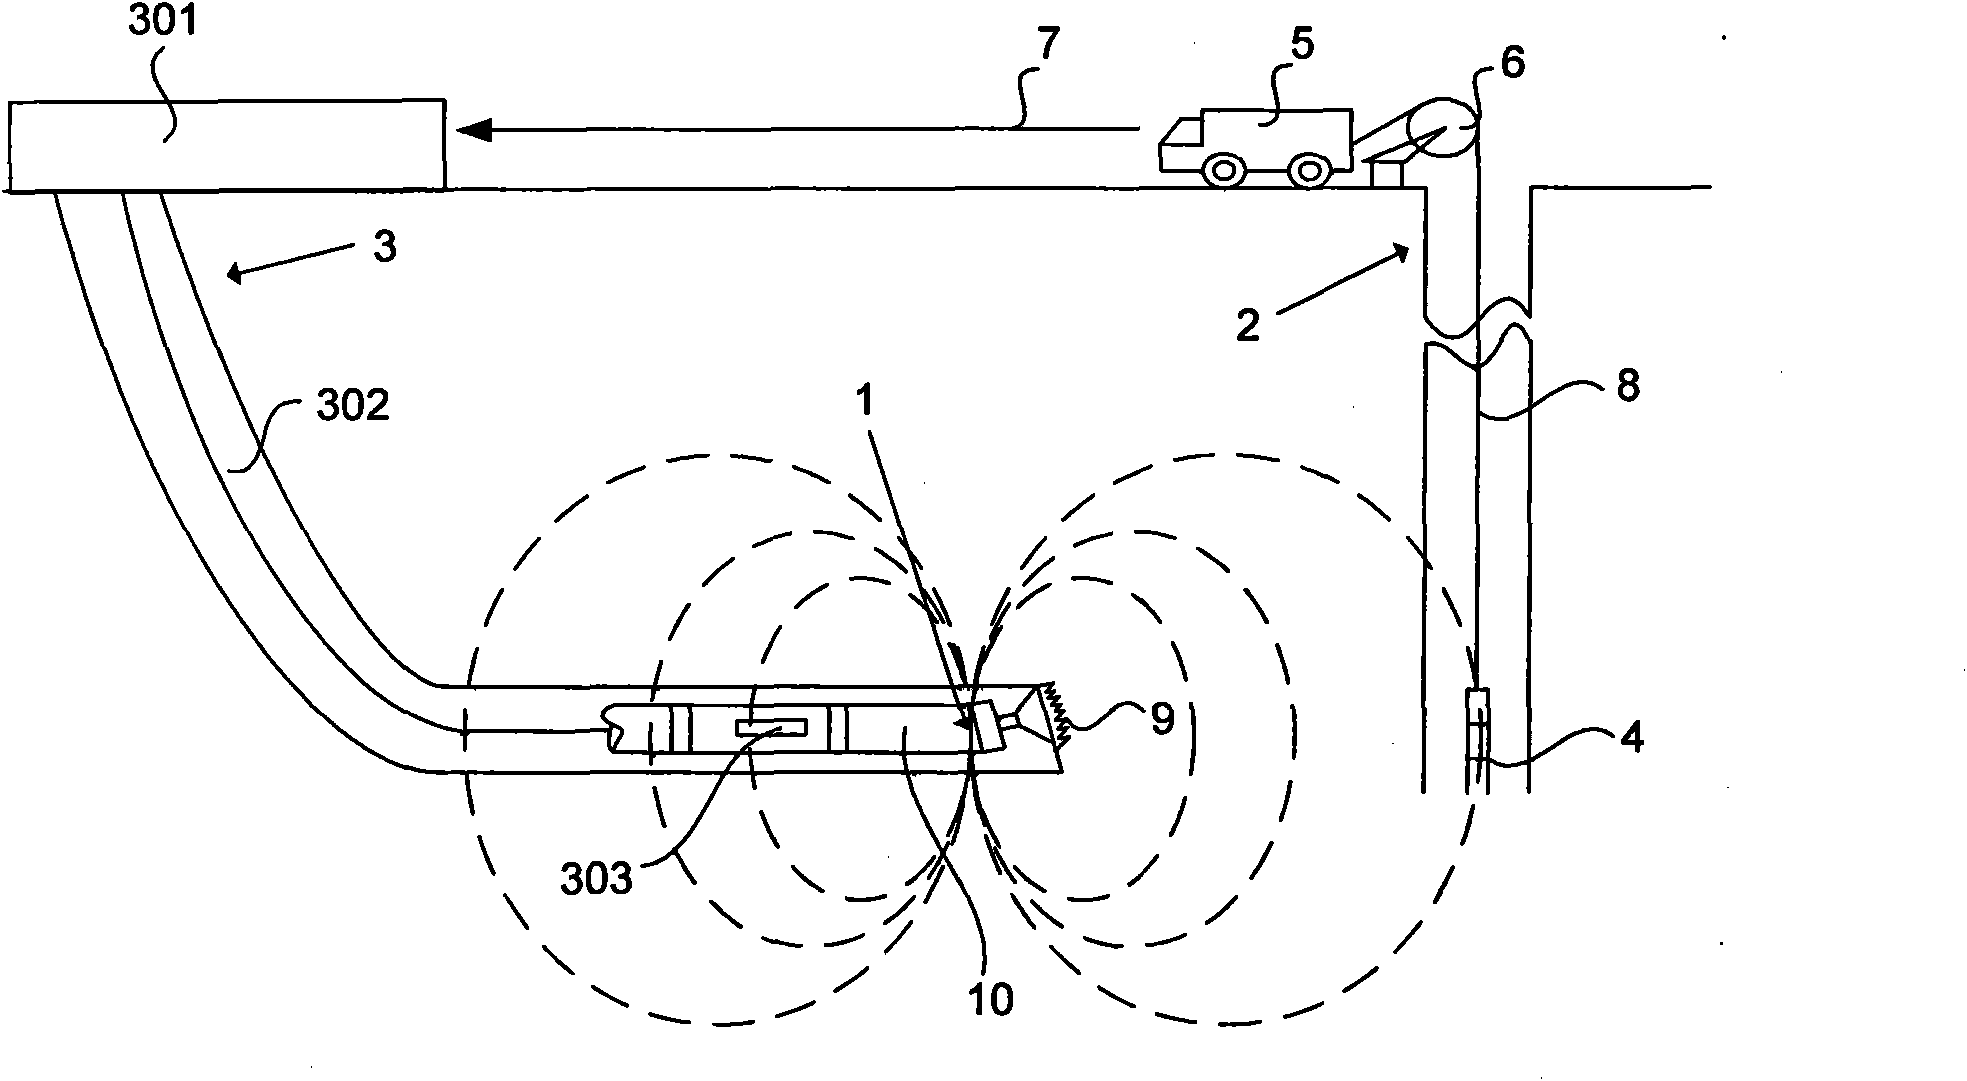 Alternating magnetic field guiding device